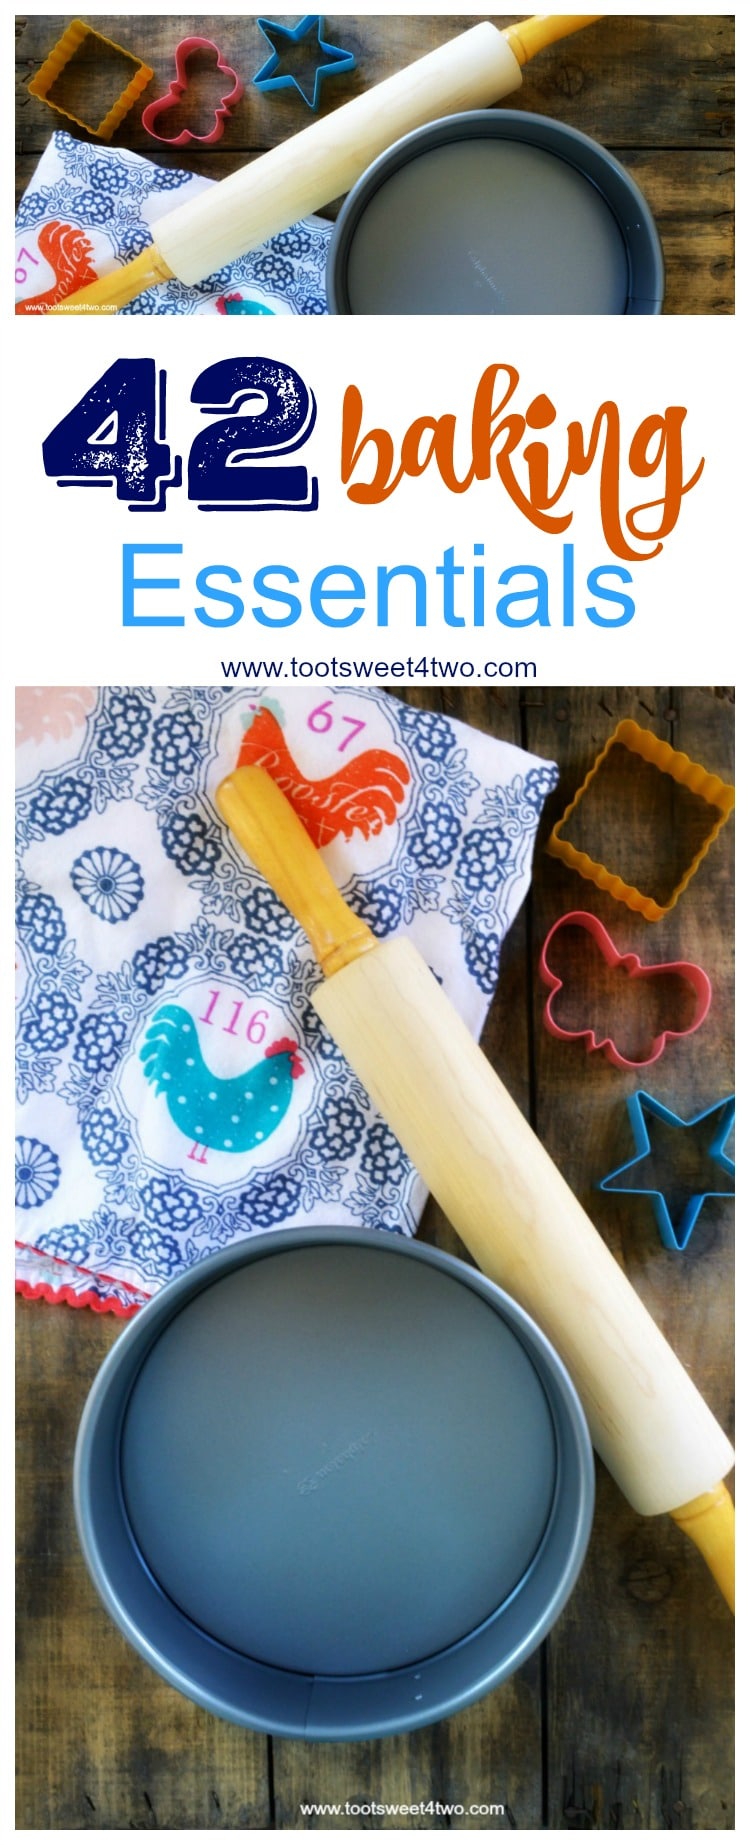 42 Baking Essentials You Need to Complete Your Home Kitchen - Toot